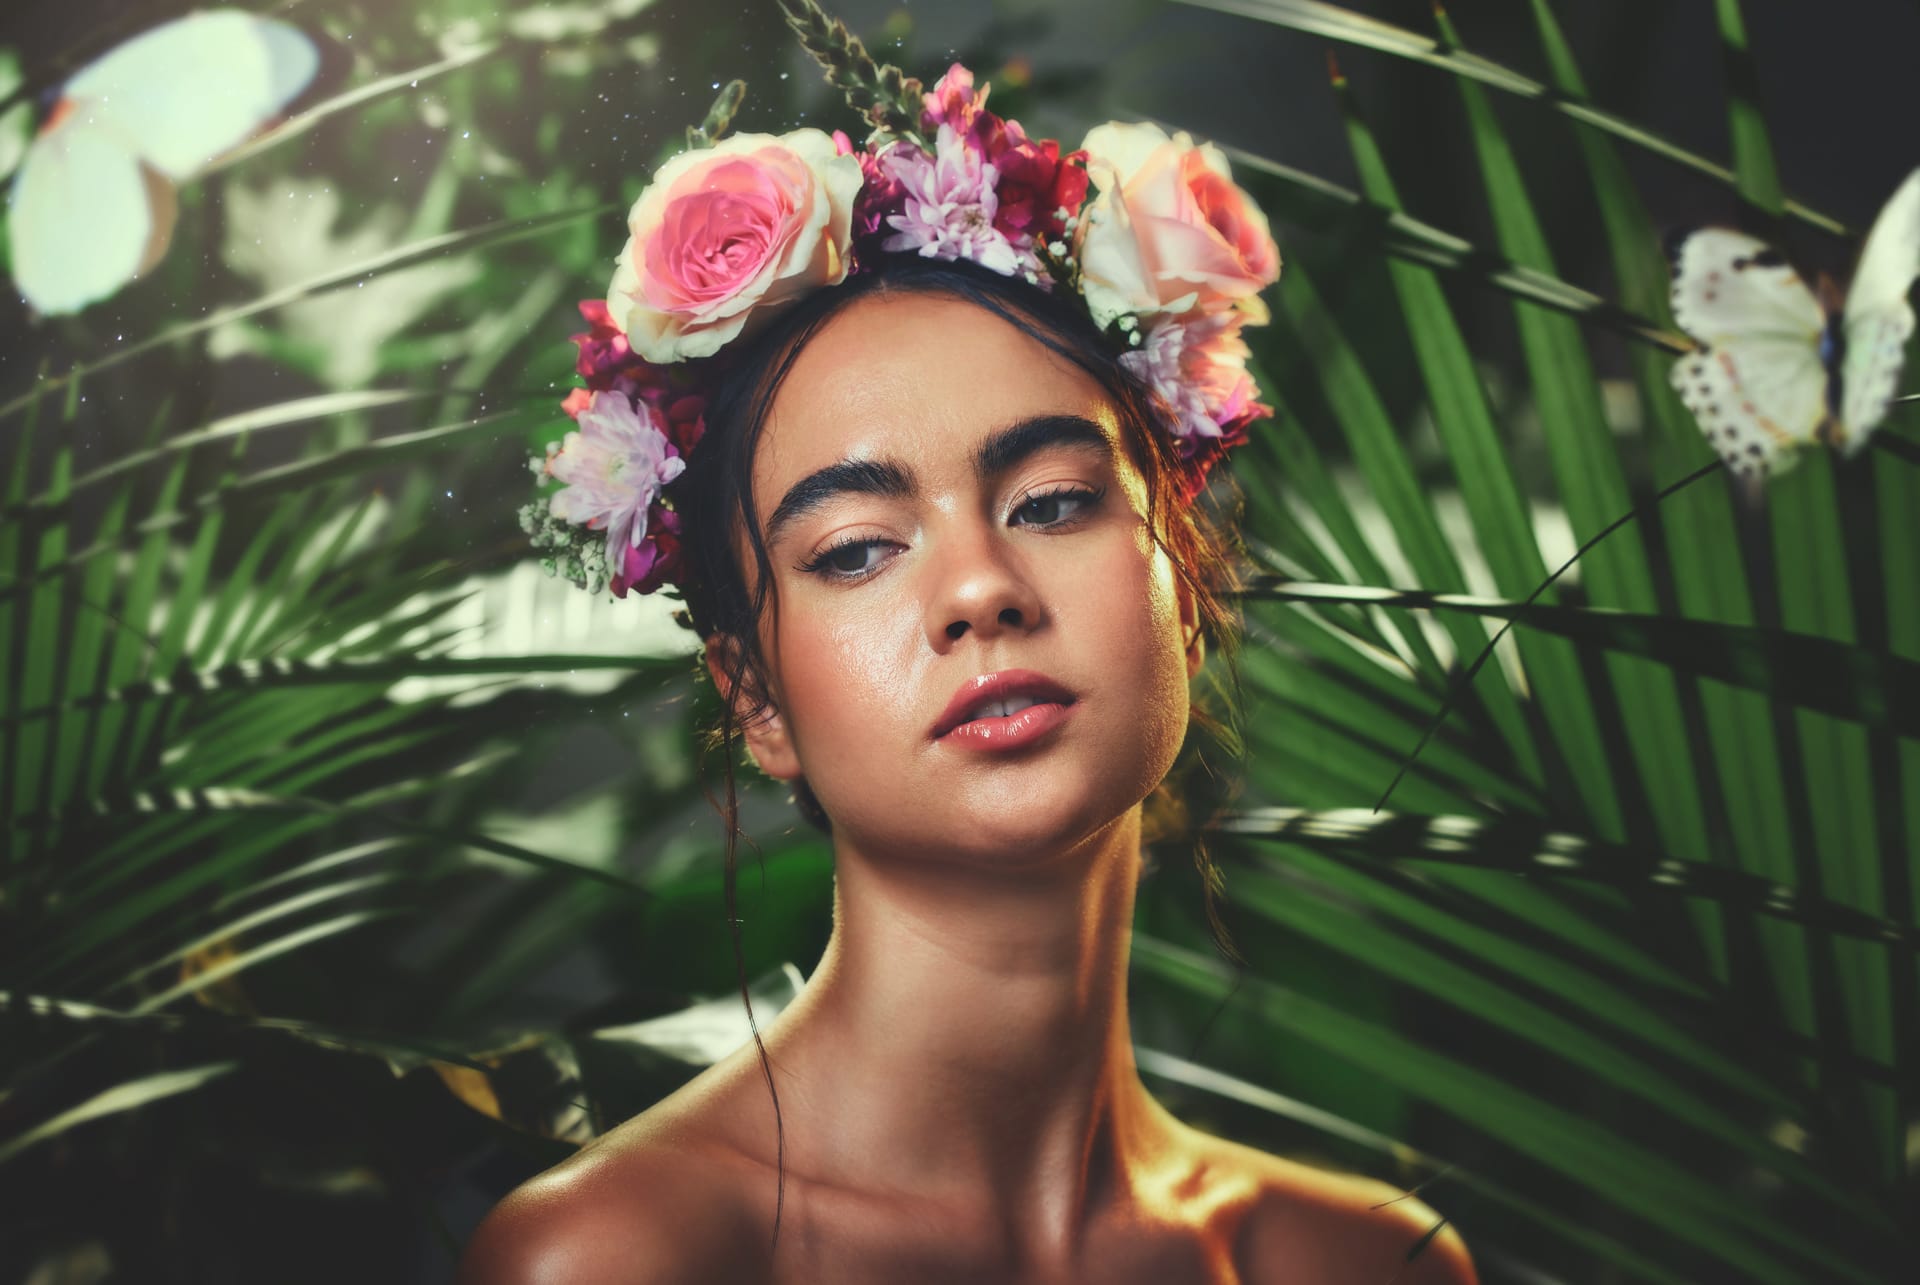 Tropical dermatology product cosmetics makeup aesthetic spring model with natural floral mockup